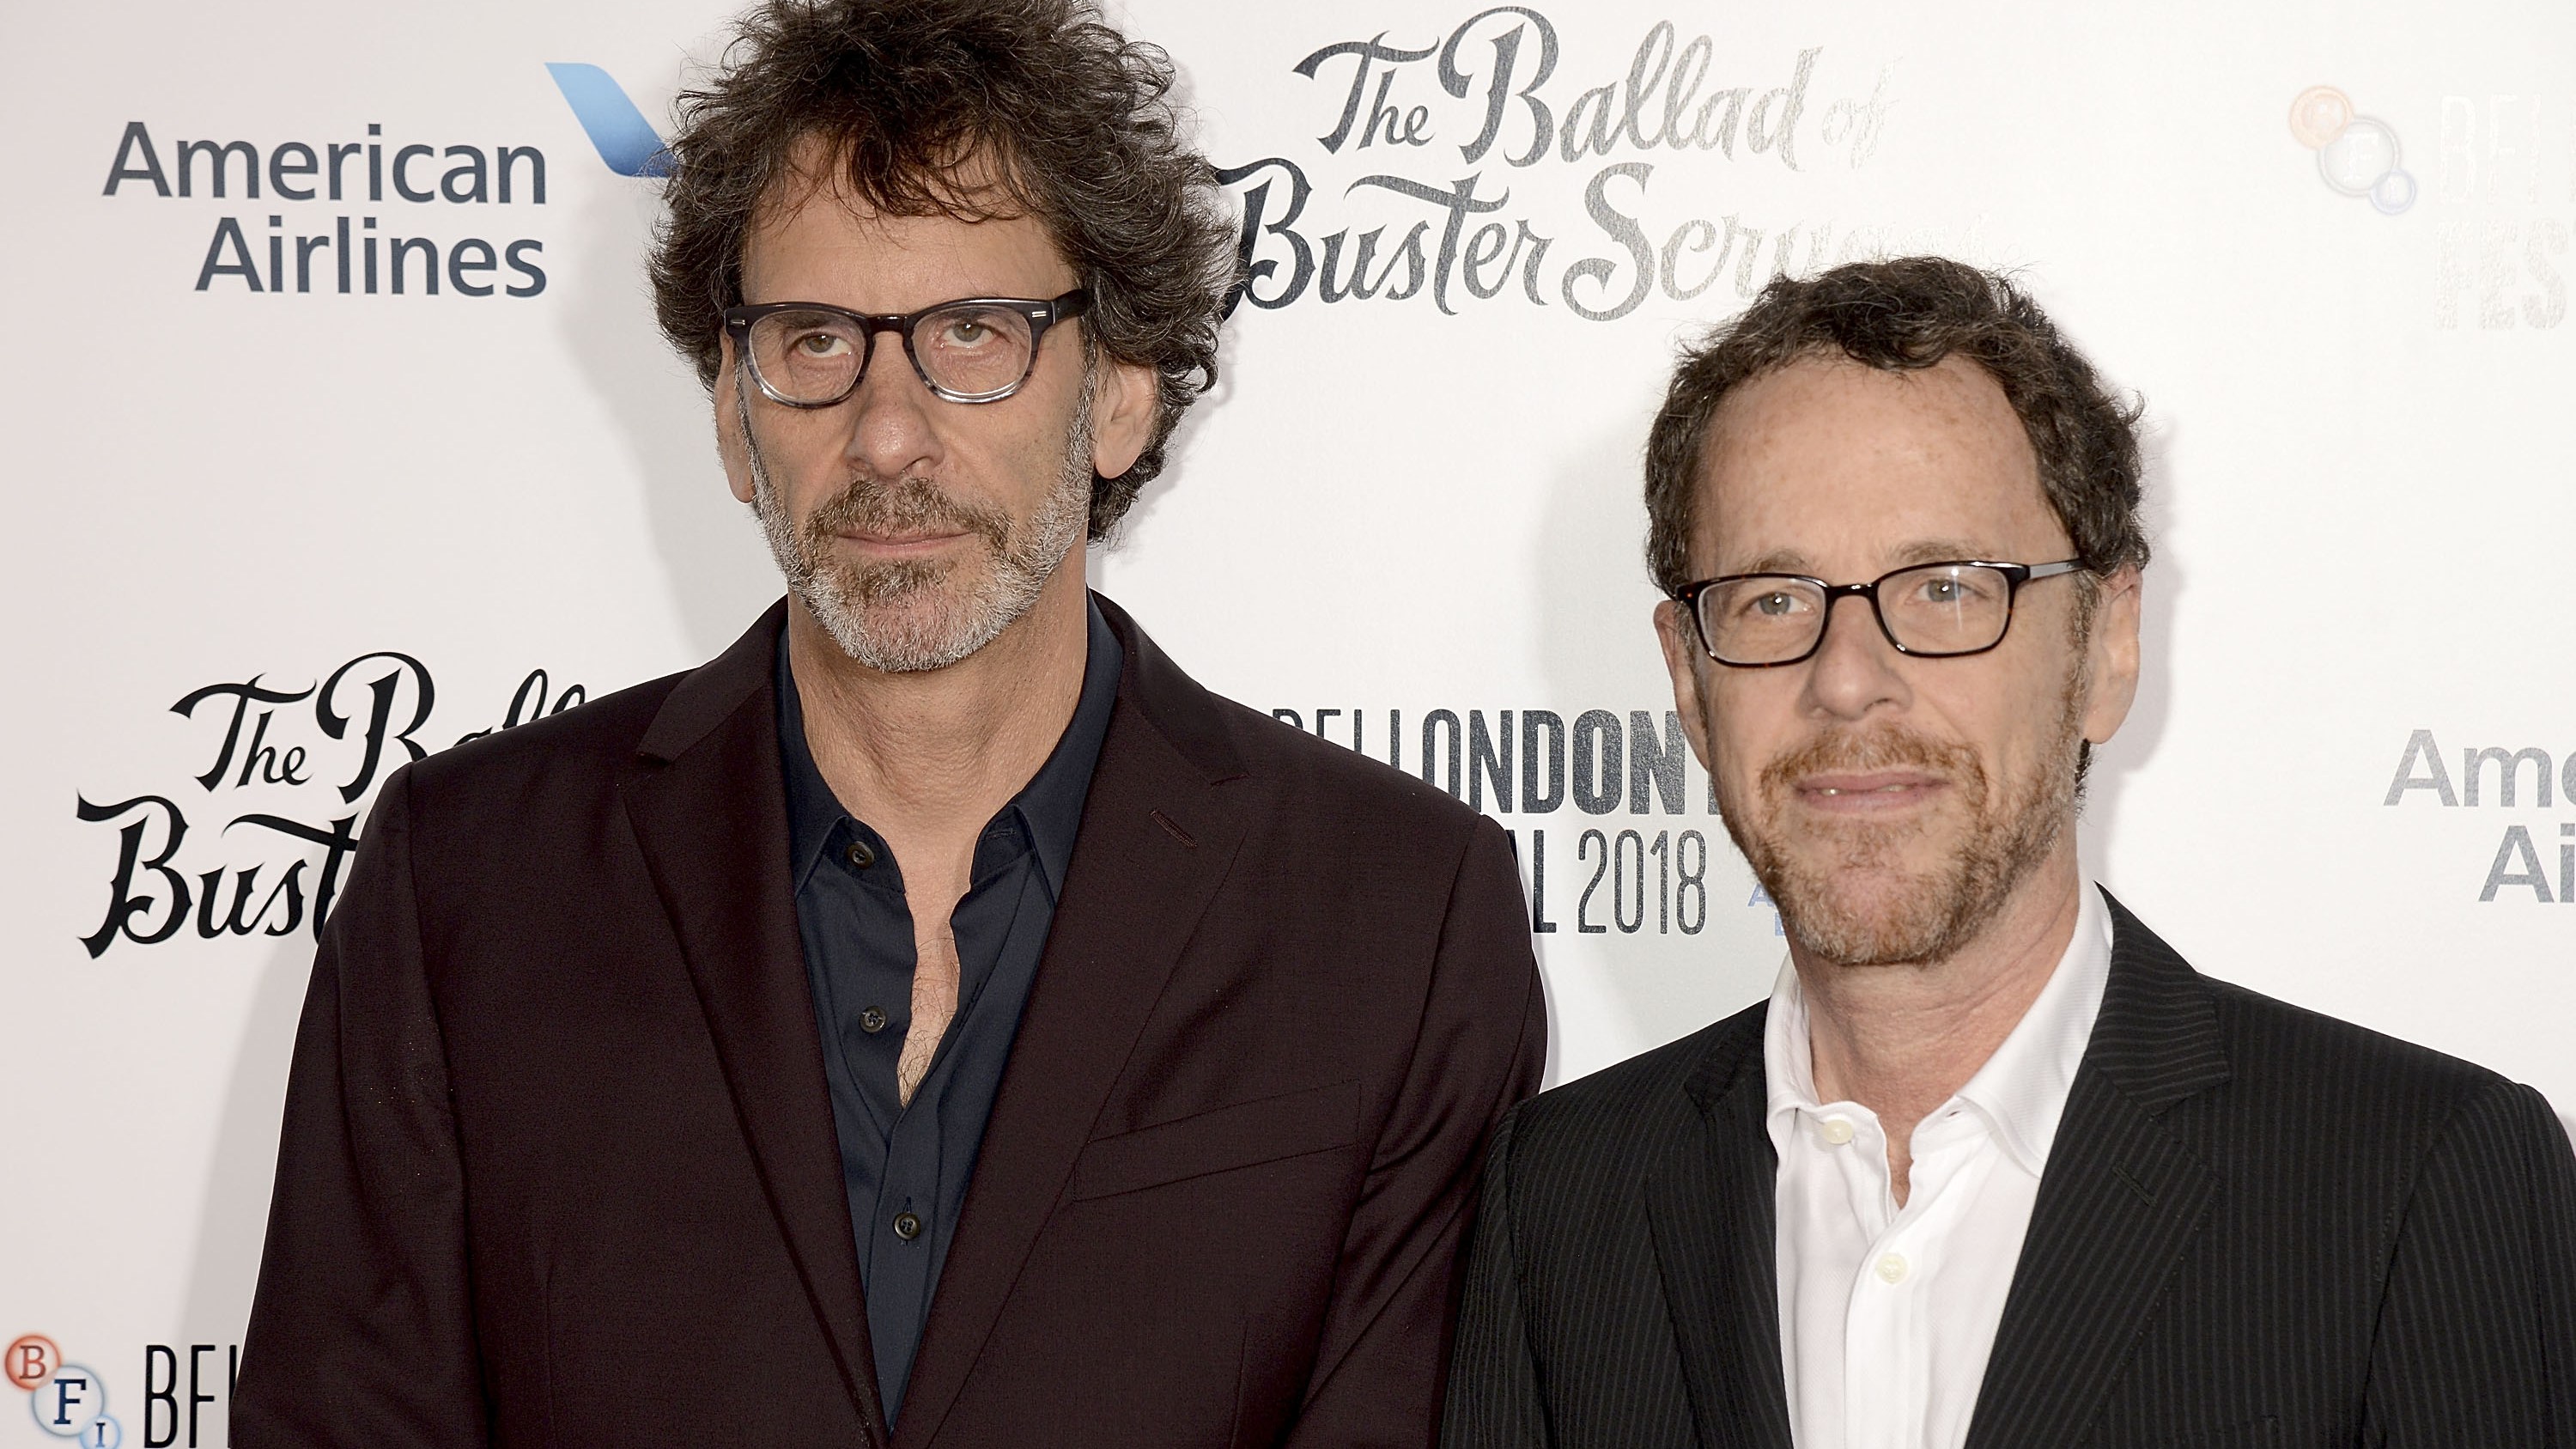 Ethan Coen and Joel Coen attend the UK Premiere of "The Ballad of Buster Scruggs" in 2018